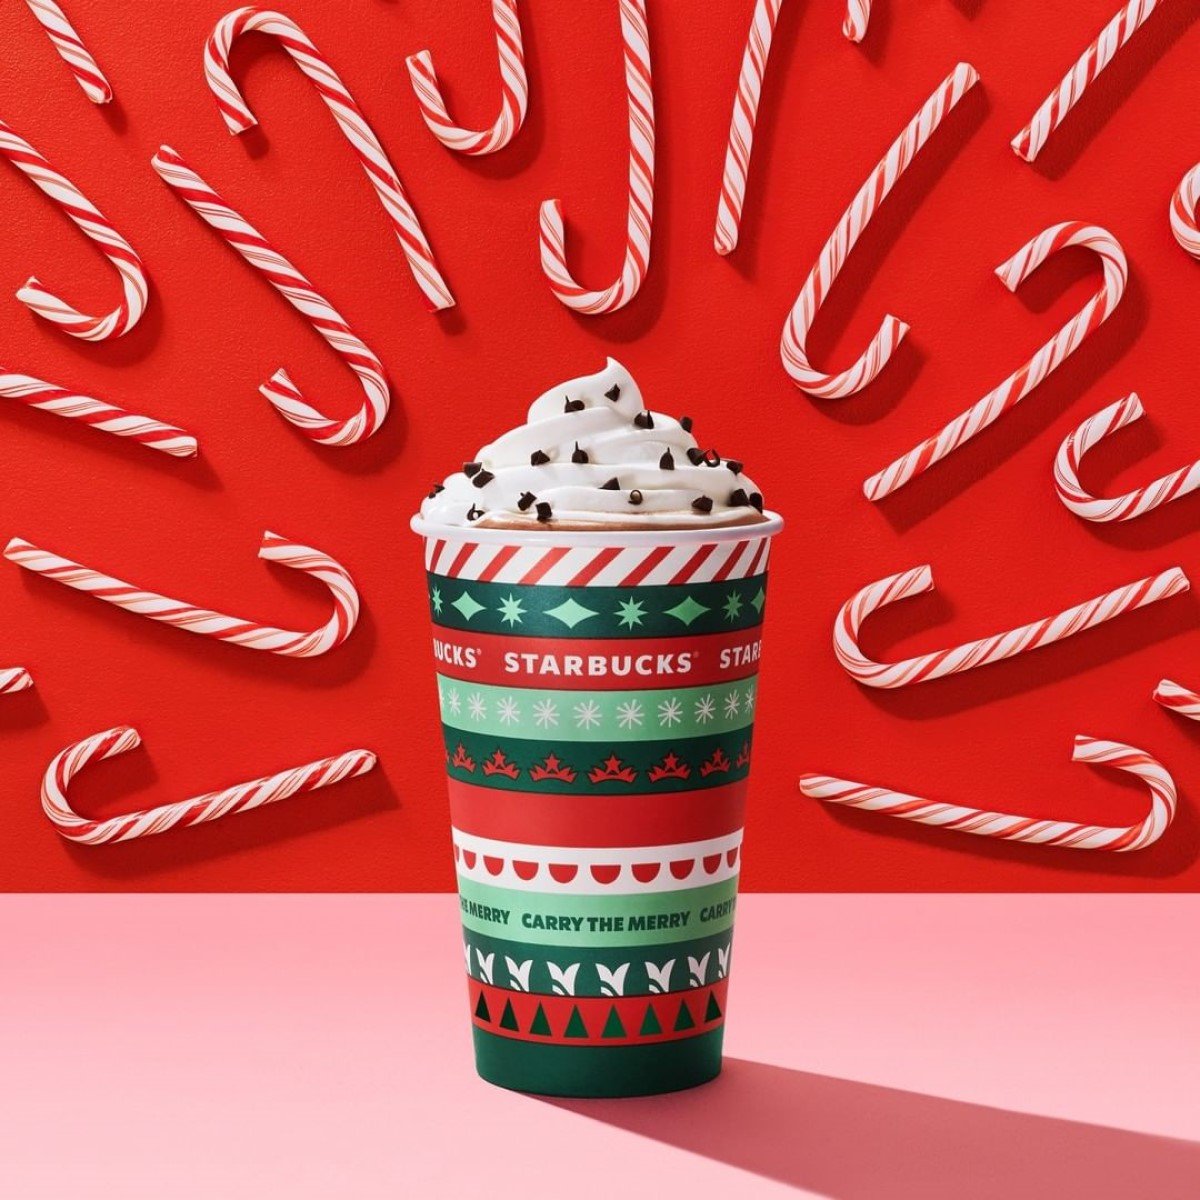 cup of starbucks peppermint mocha on pink surface with peppermint candy canes on red background